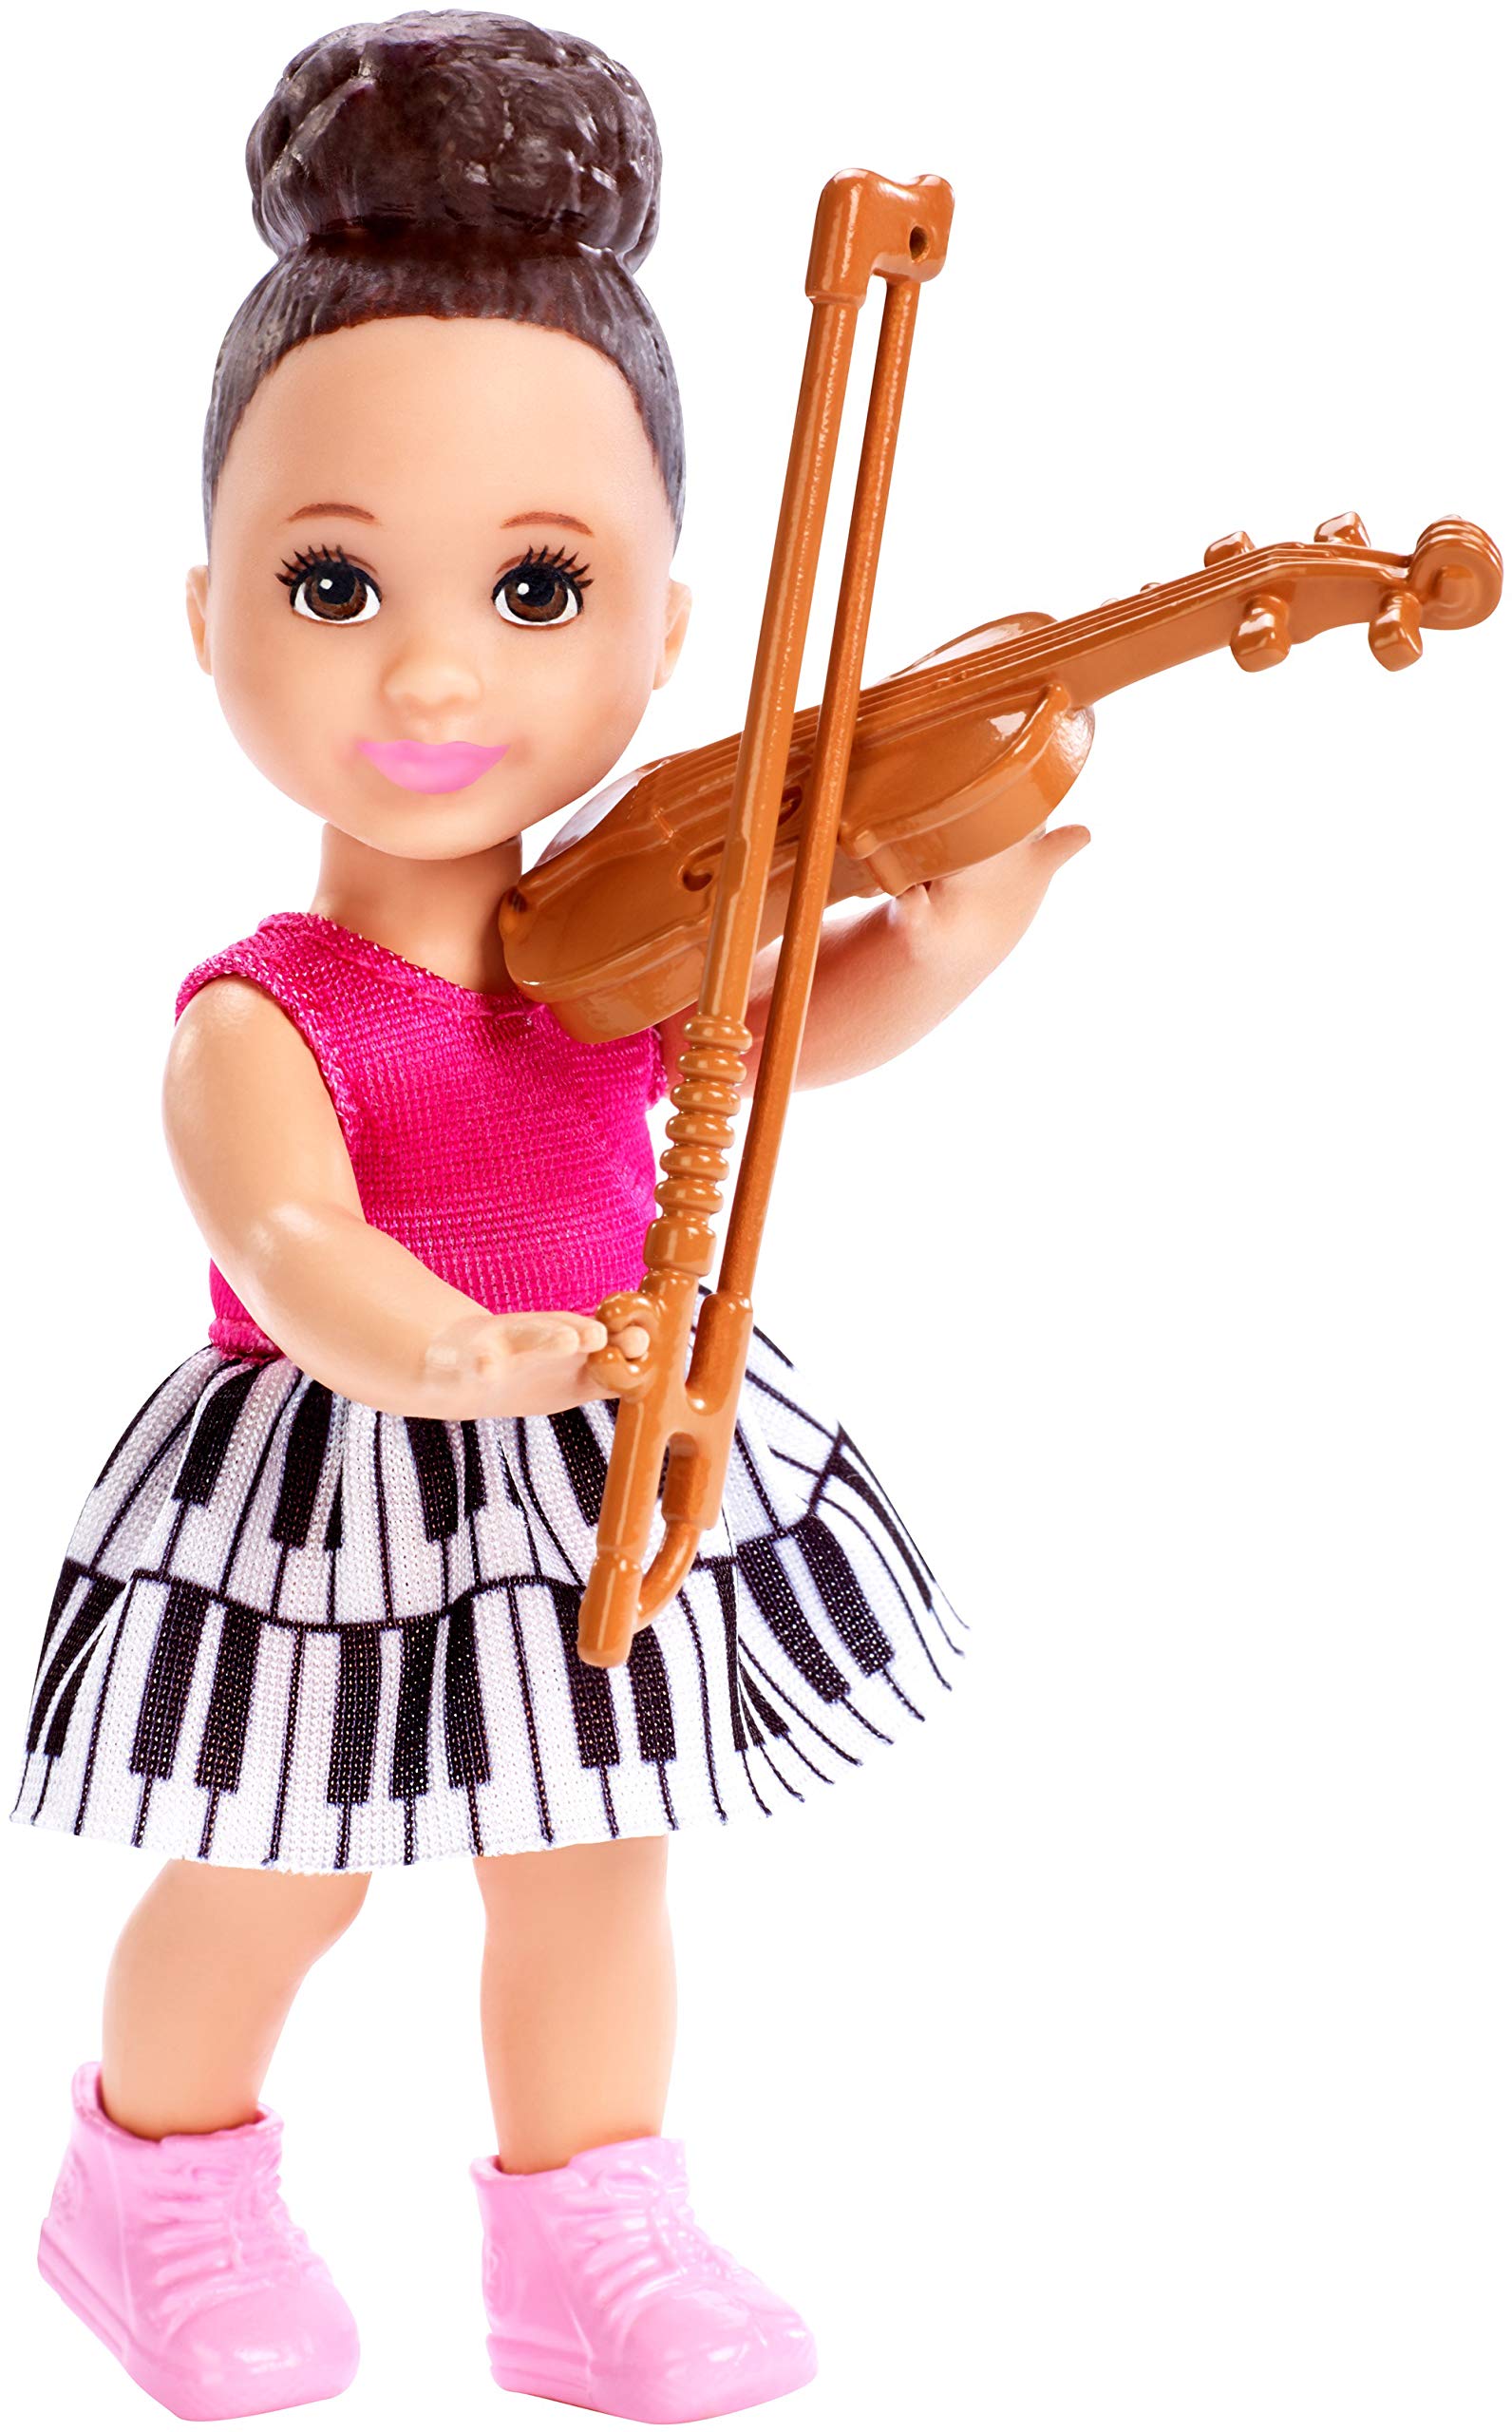 Barbie Music Teacher Doll, Blonde, and Playset with Flipping Chalkboard, Brunette Student Small Doll and 4 Musical Instruments, Career-Themed Toy for 3 to 7 Year Old Kids​​​